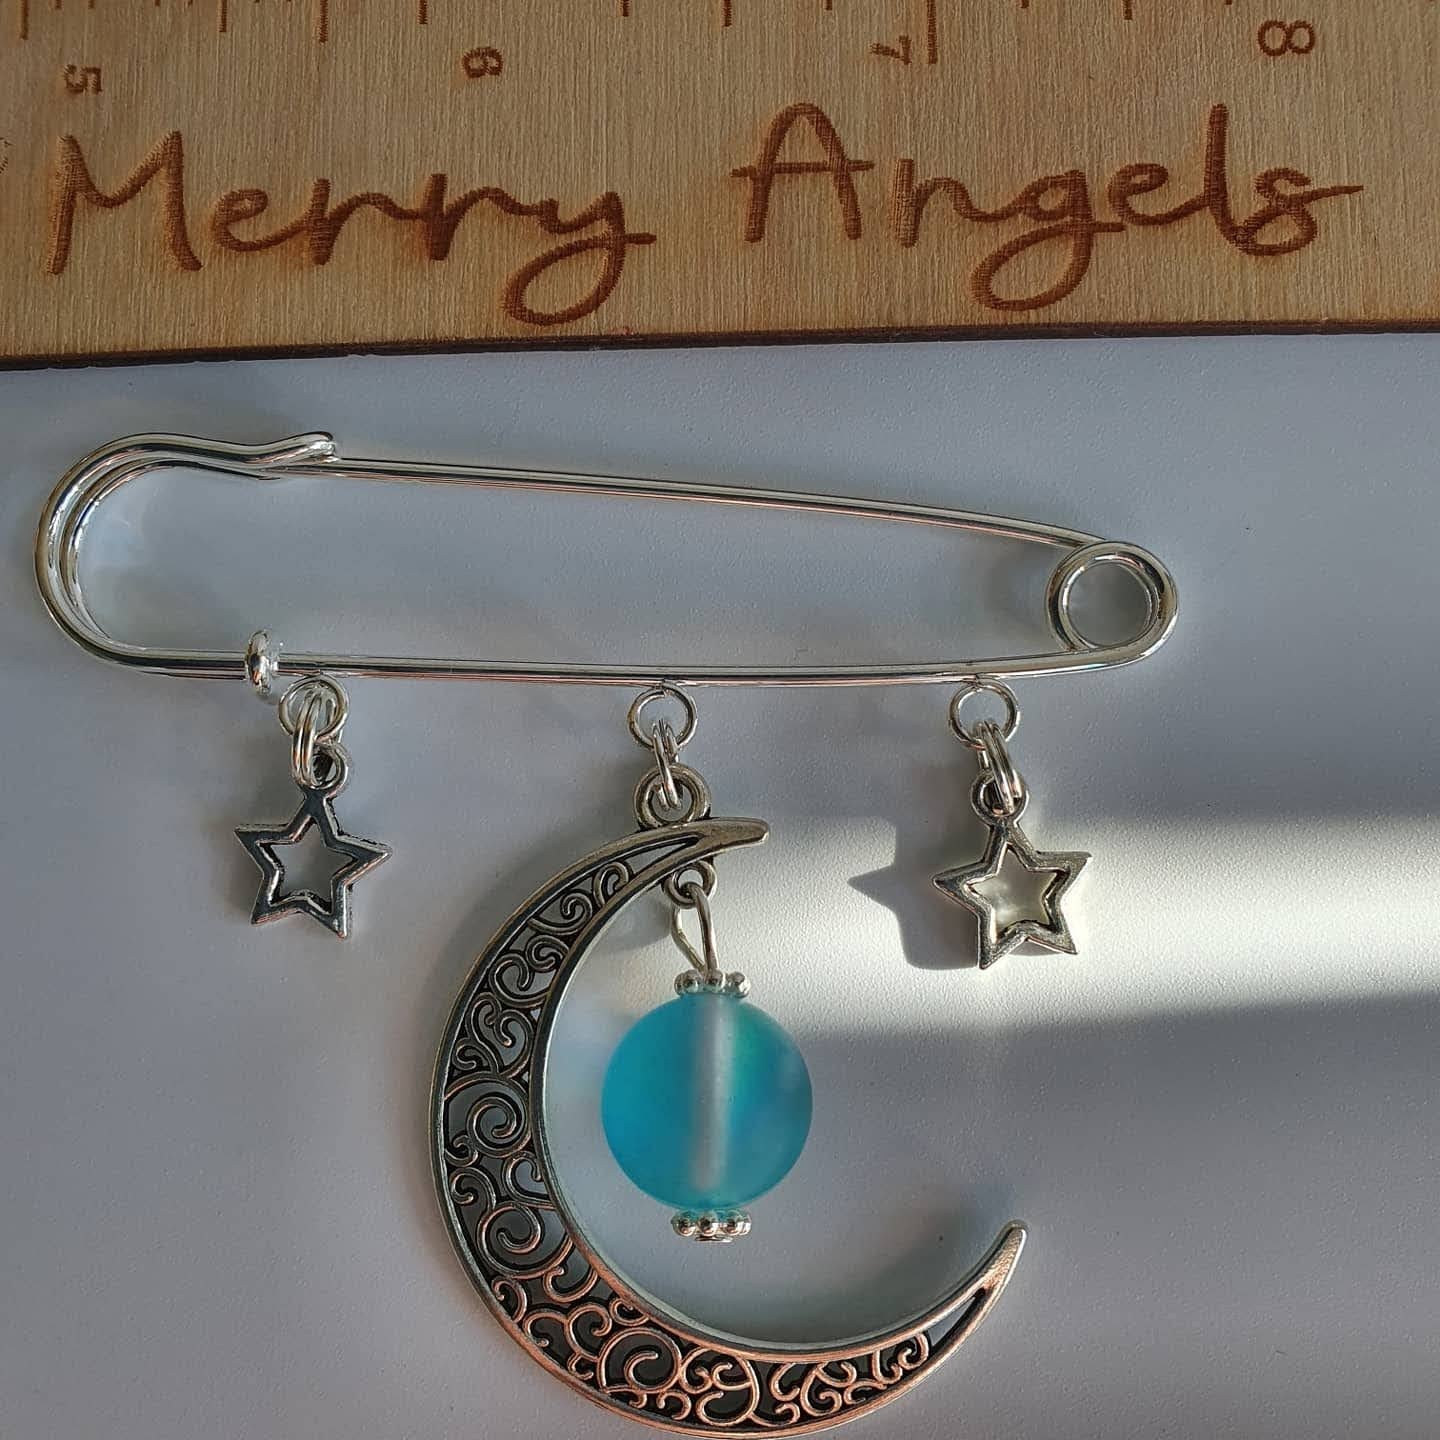 A silver plated pram pin with 2 silver star charms and a silver moon charm with a blue bead hanging from it. 